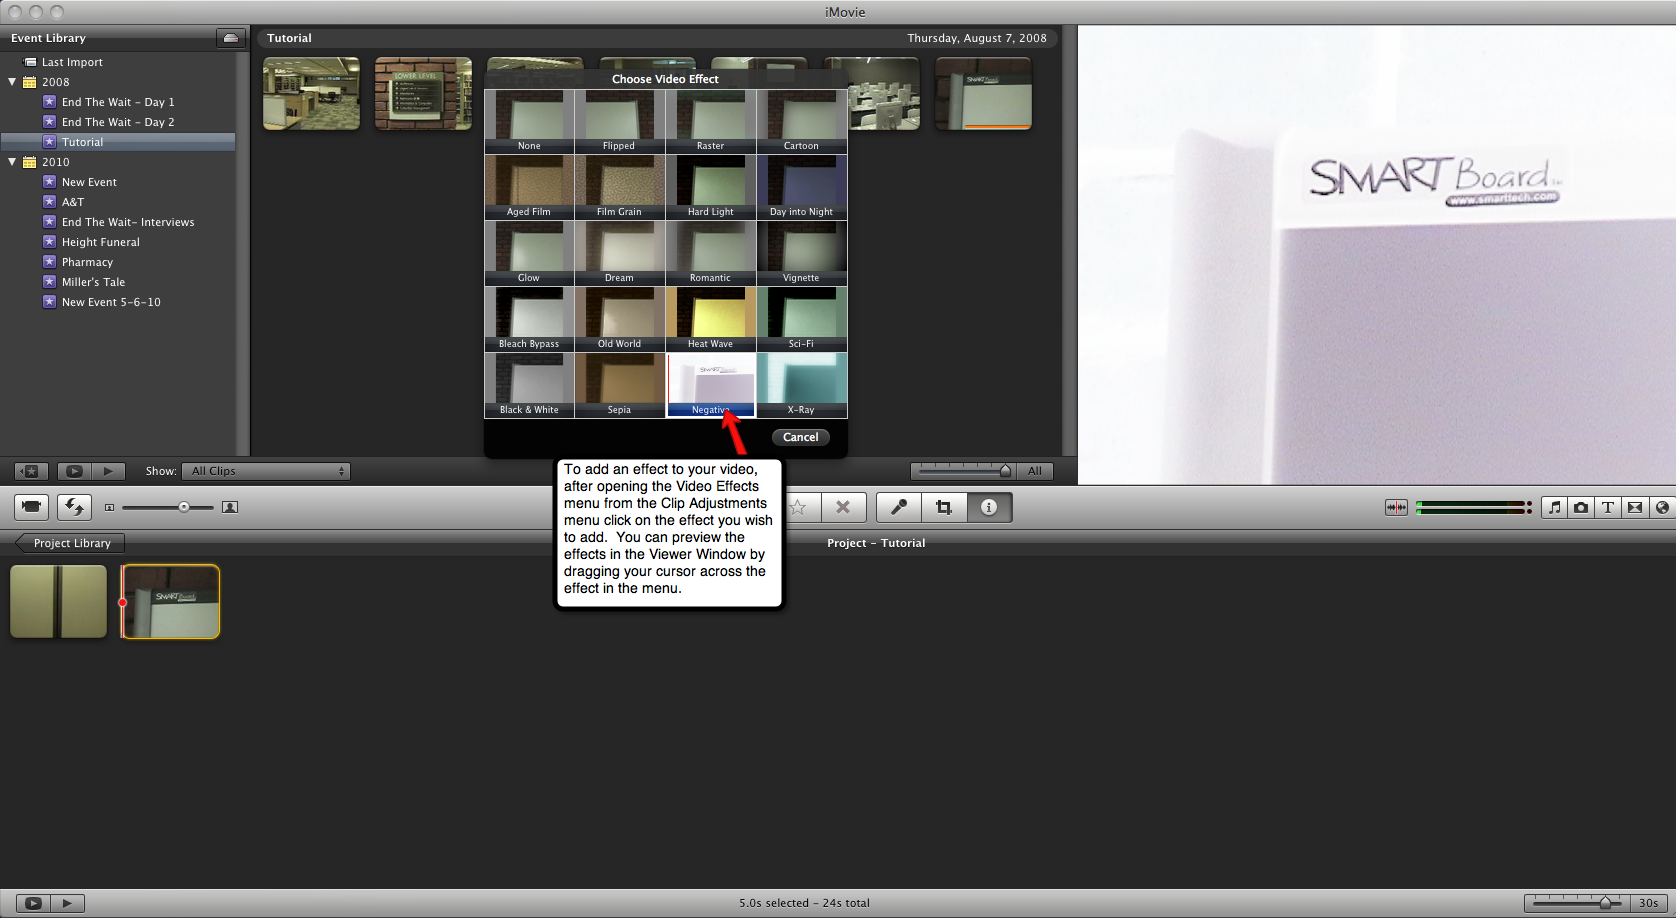 Visual guide to adding video effects in iMovie '09.